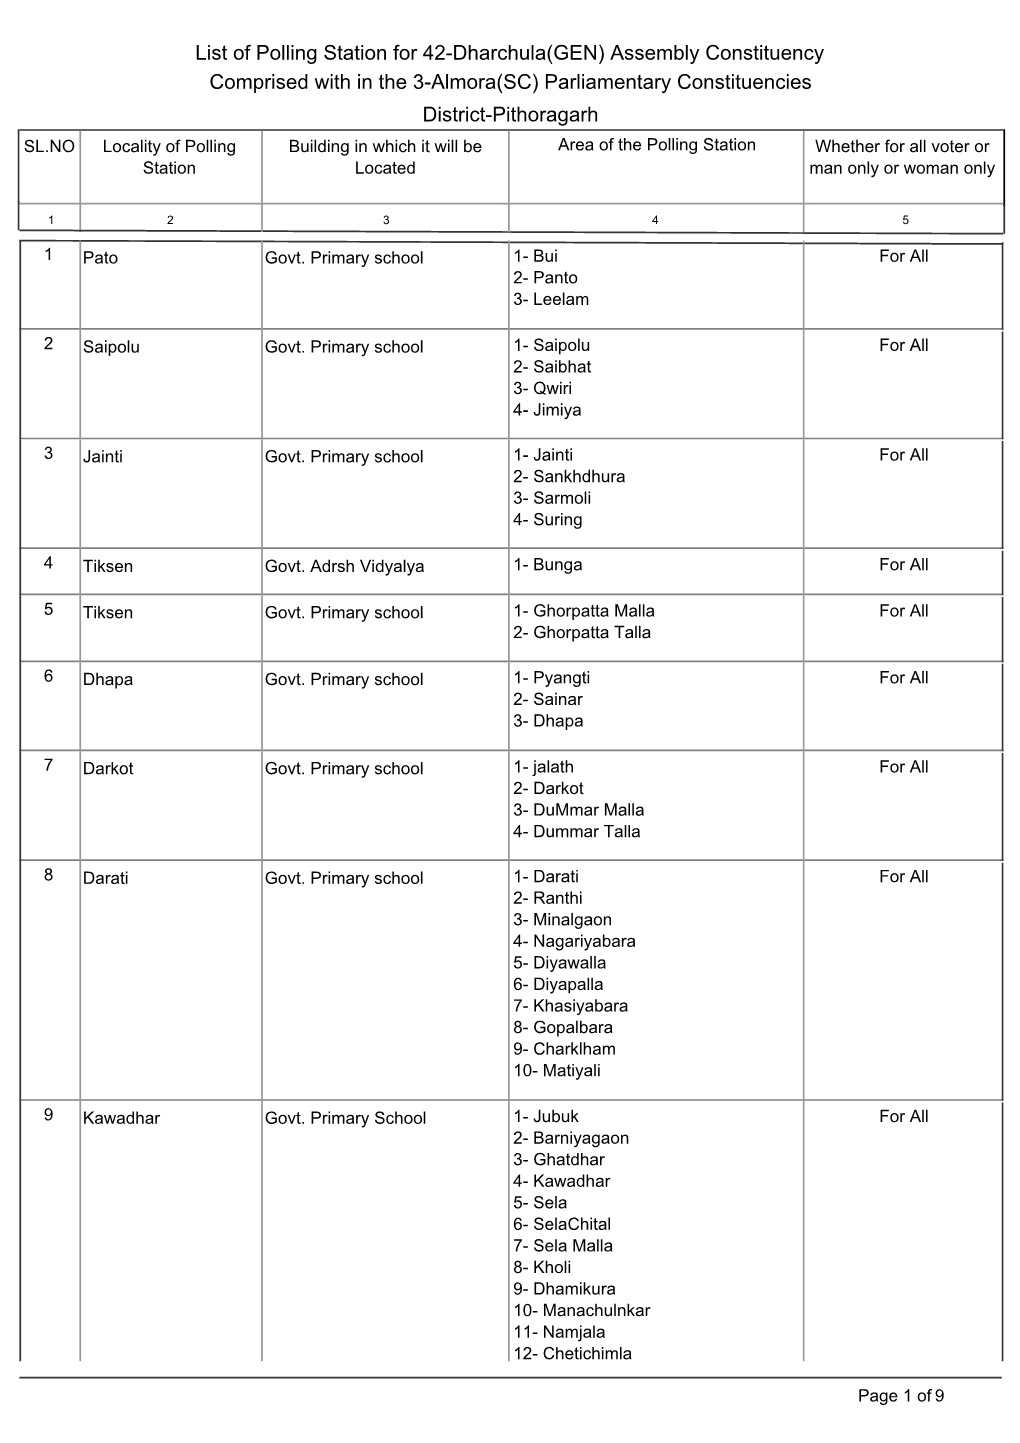 List of Polling Station for 42-Dharchula(GEN) Assembly